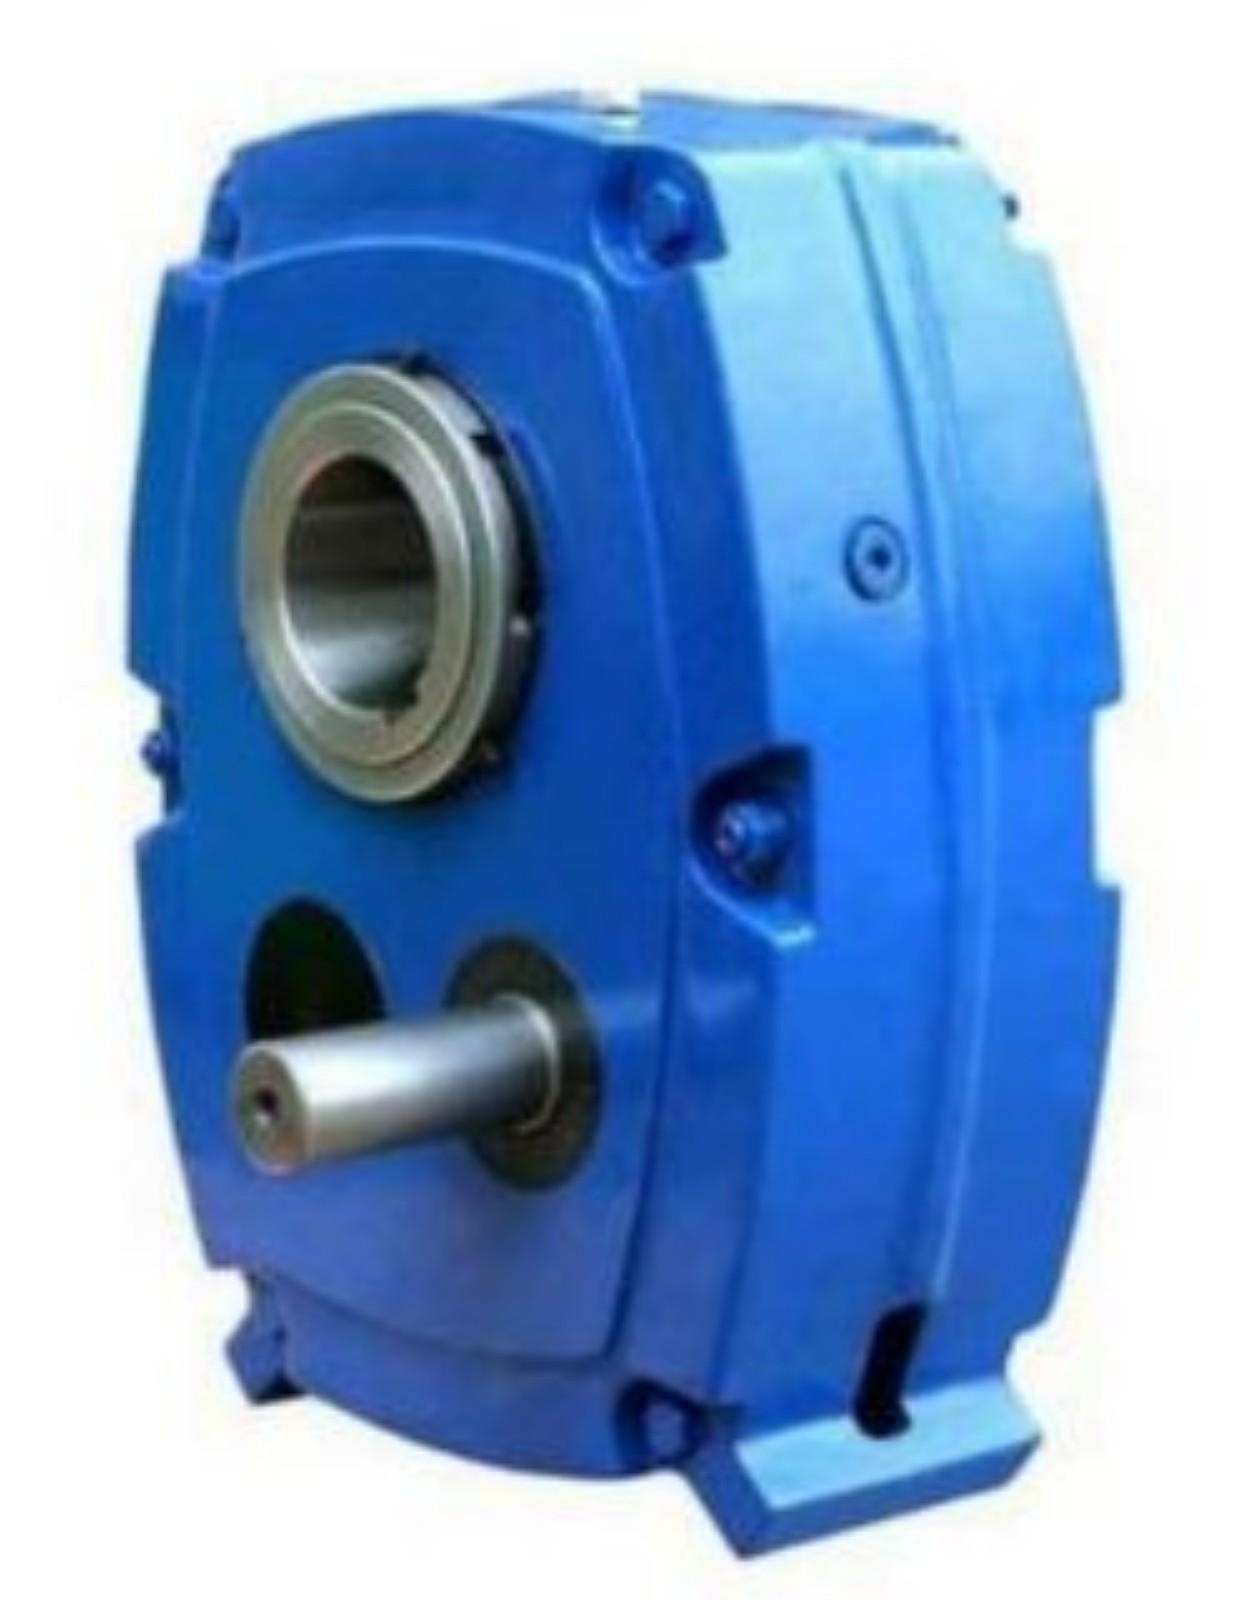 Buy 2 - 110 kW Worm Reduction Gear Box 5:1 - 7:1 100 - 4500 Nm online at  best rates in India